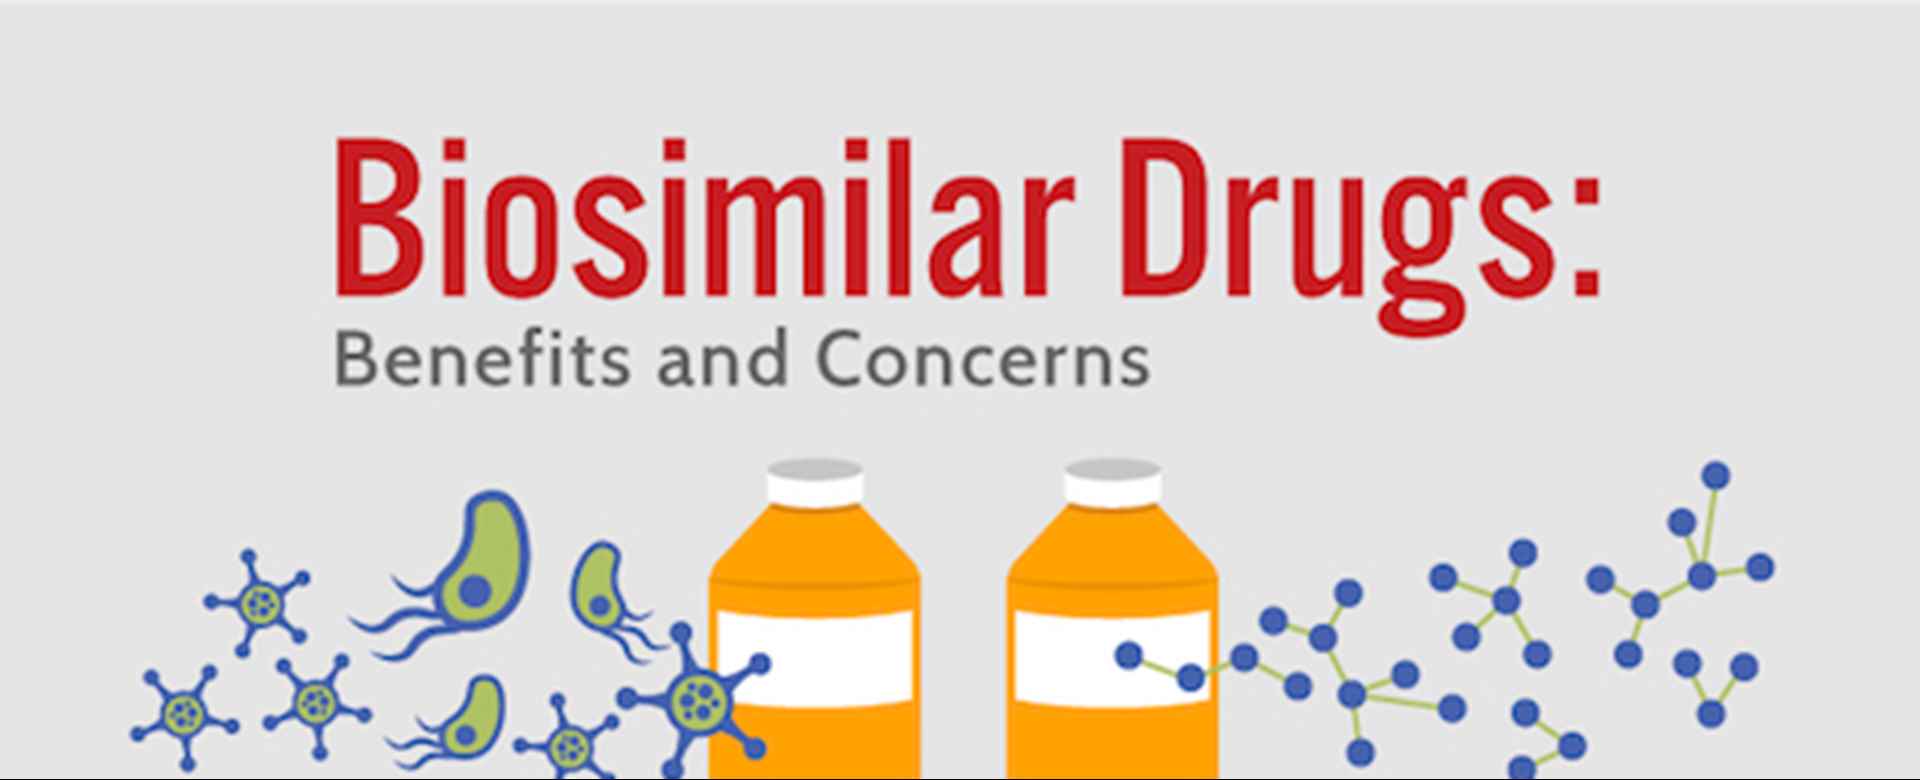 Biosimilar Drugs - Benefits and Concerns [Infographic]